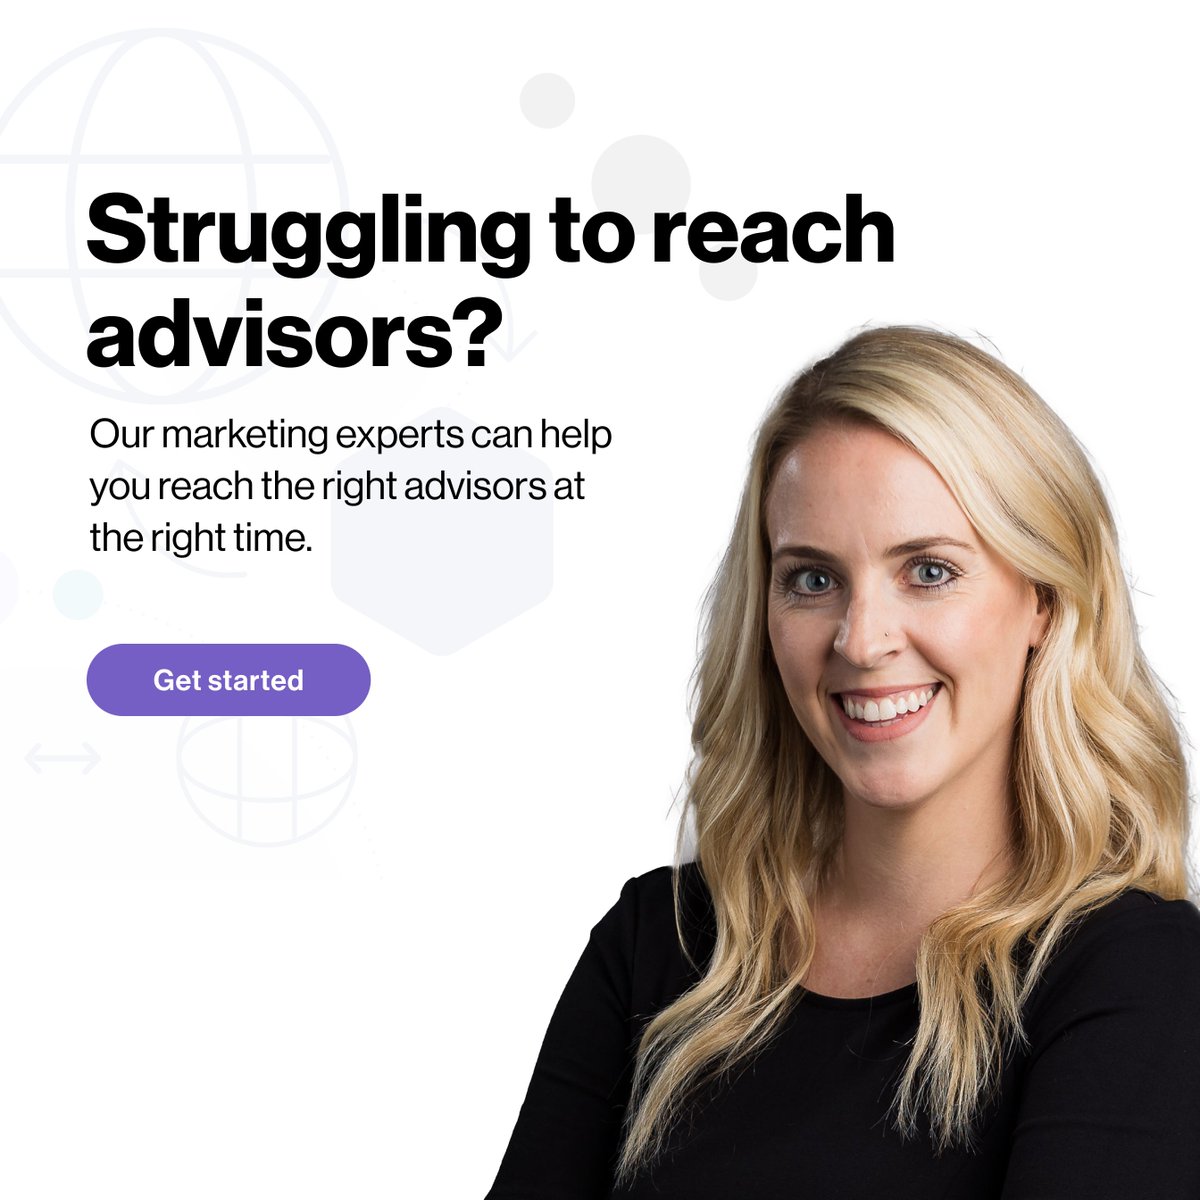 #AssetManagers are shifting gears to reach new clients and increase product adoption. From revamped marketing strategies to embracing digital transformations, the industry is evolving.

Ready to expand your reach to new segments of #FinancialAdvisors?

Chat with Tiffany Moseley…